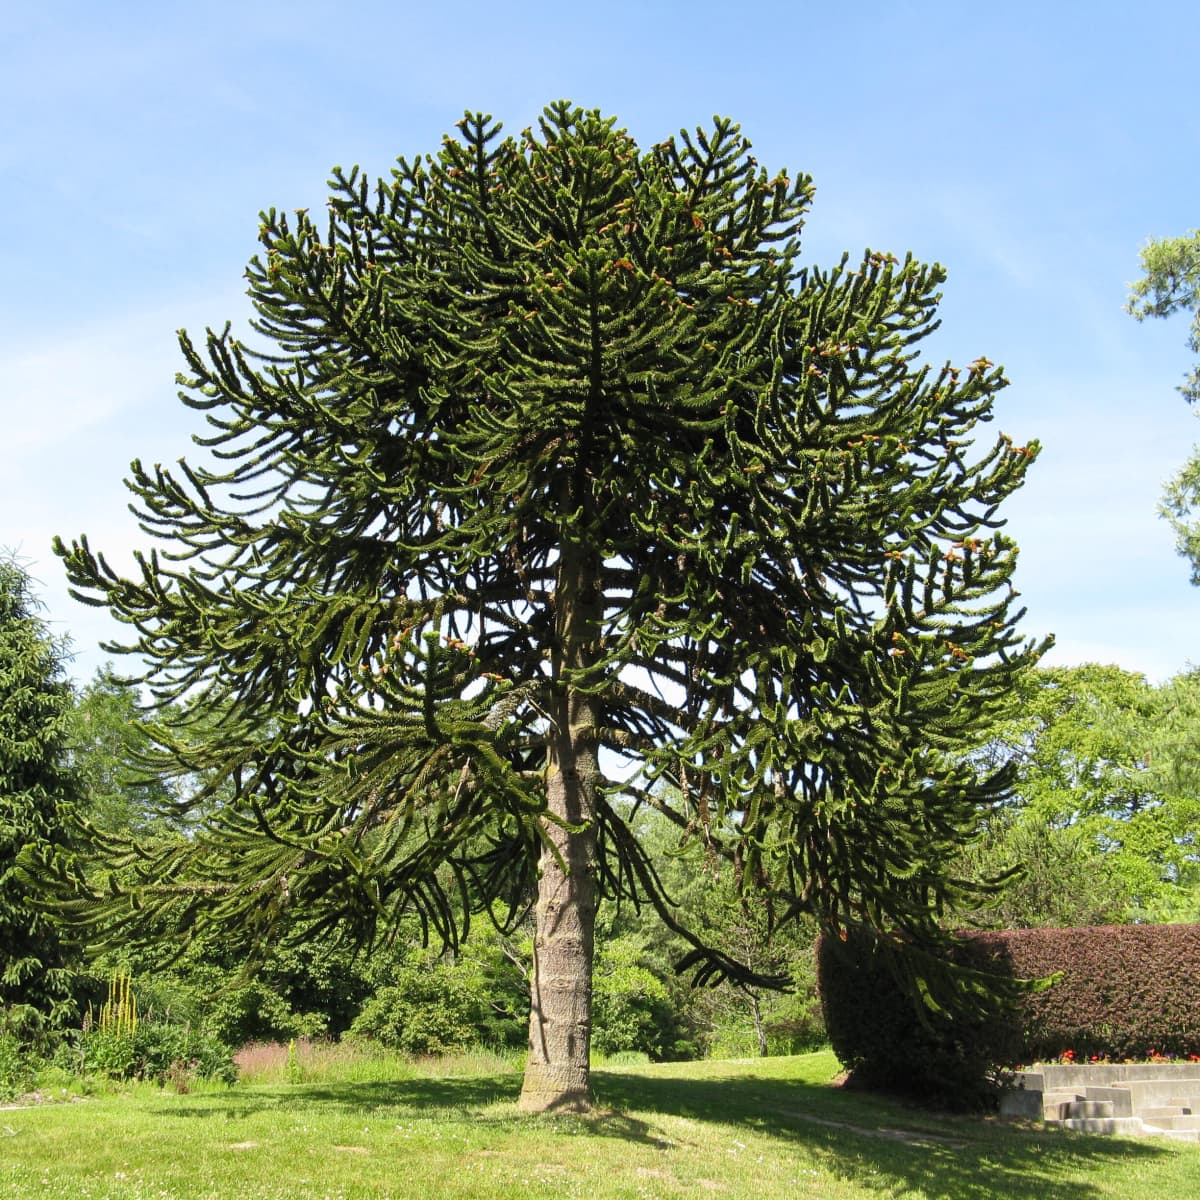 The Monkey Puzzle Tree An Unusual and Endangered Plant   Owlcation